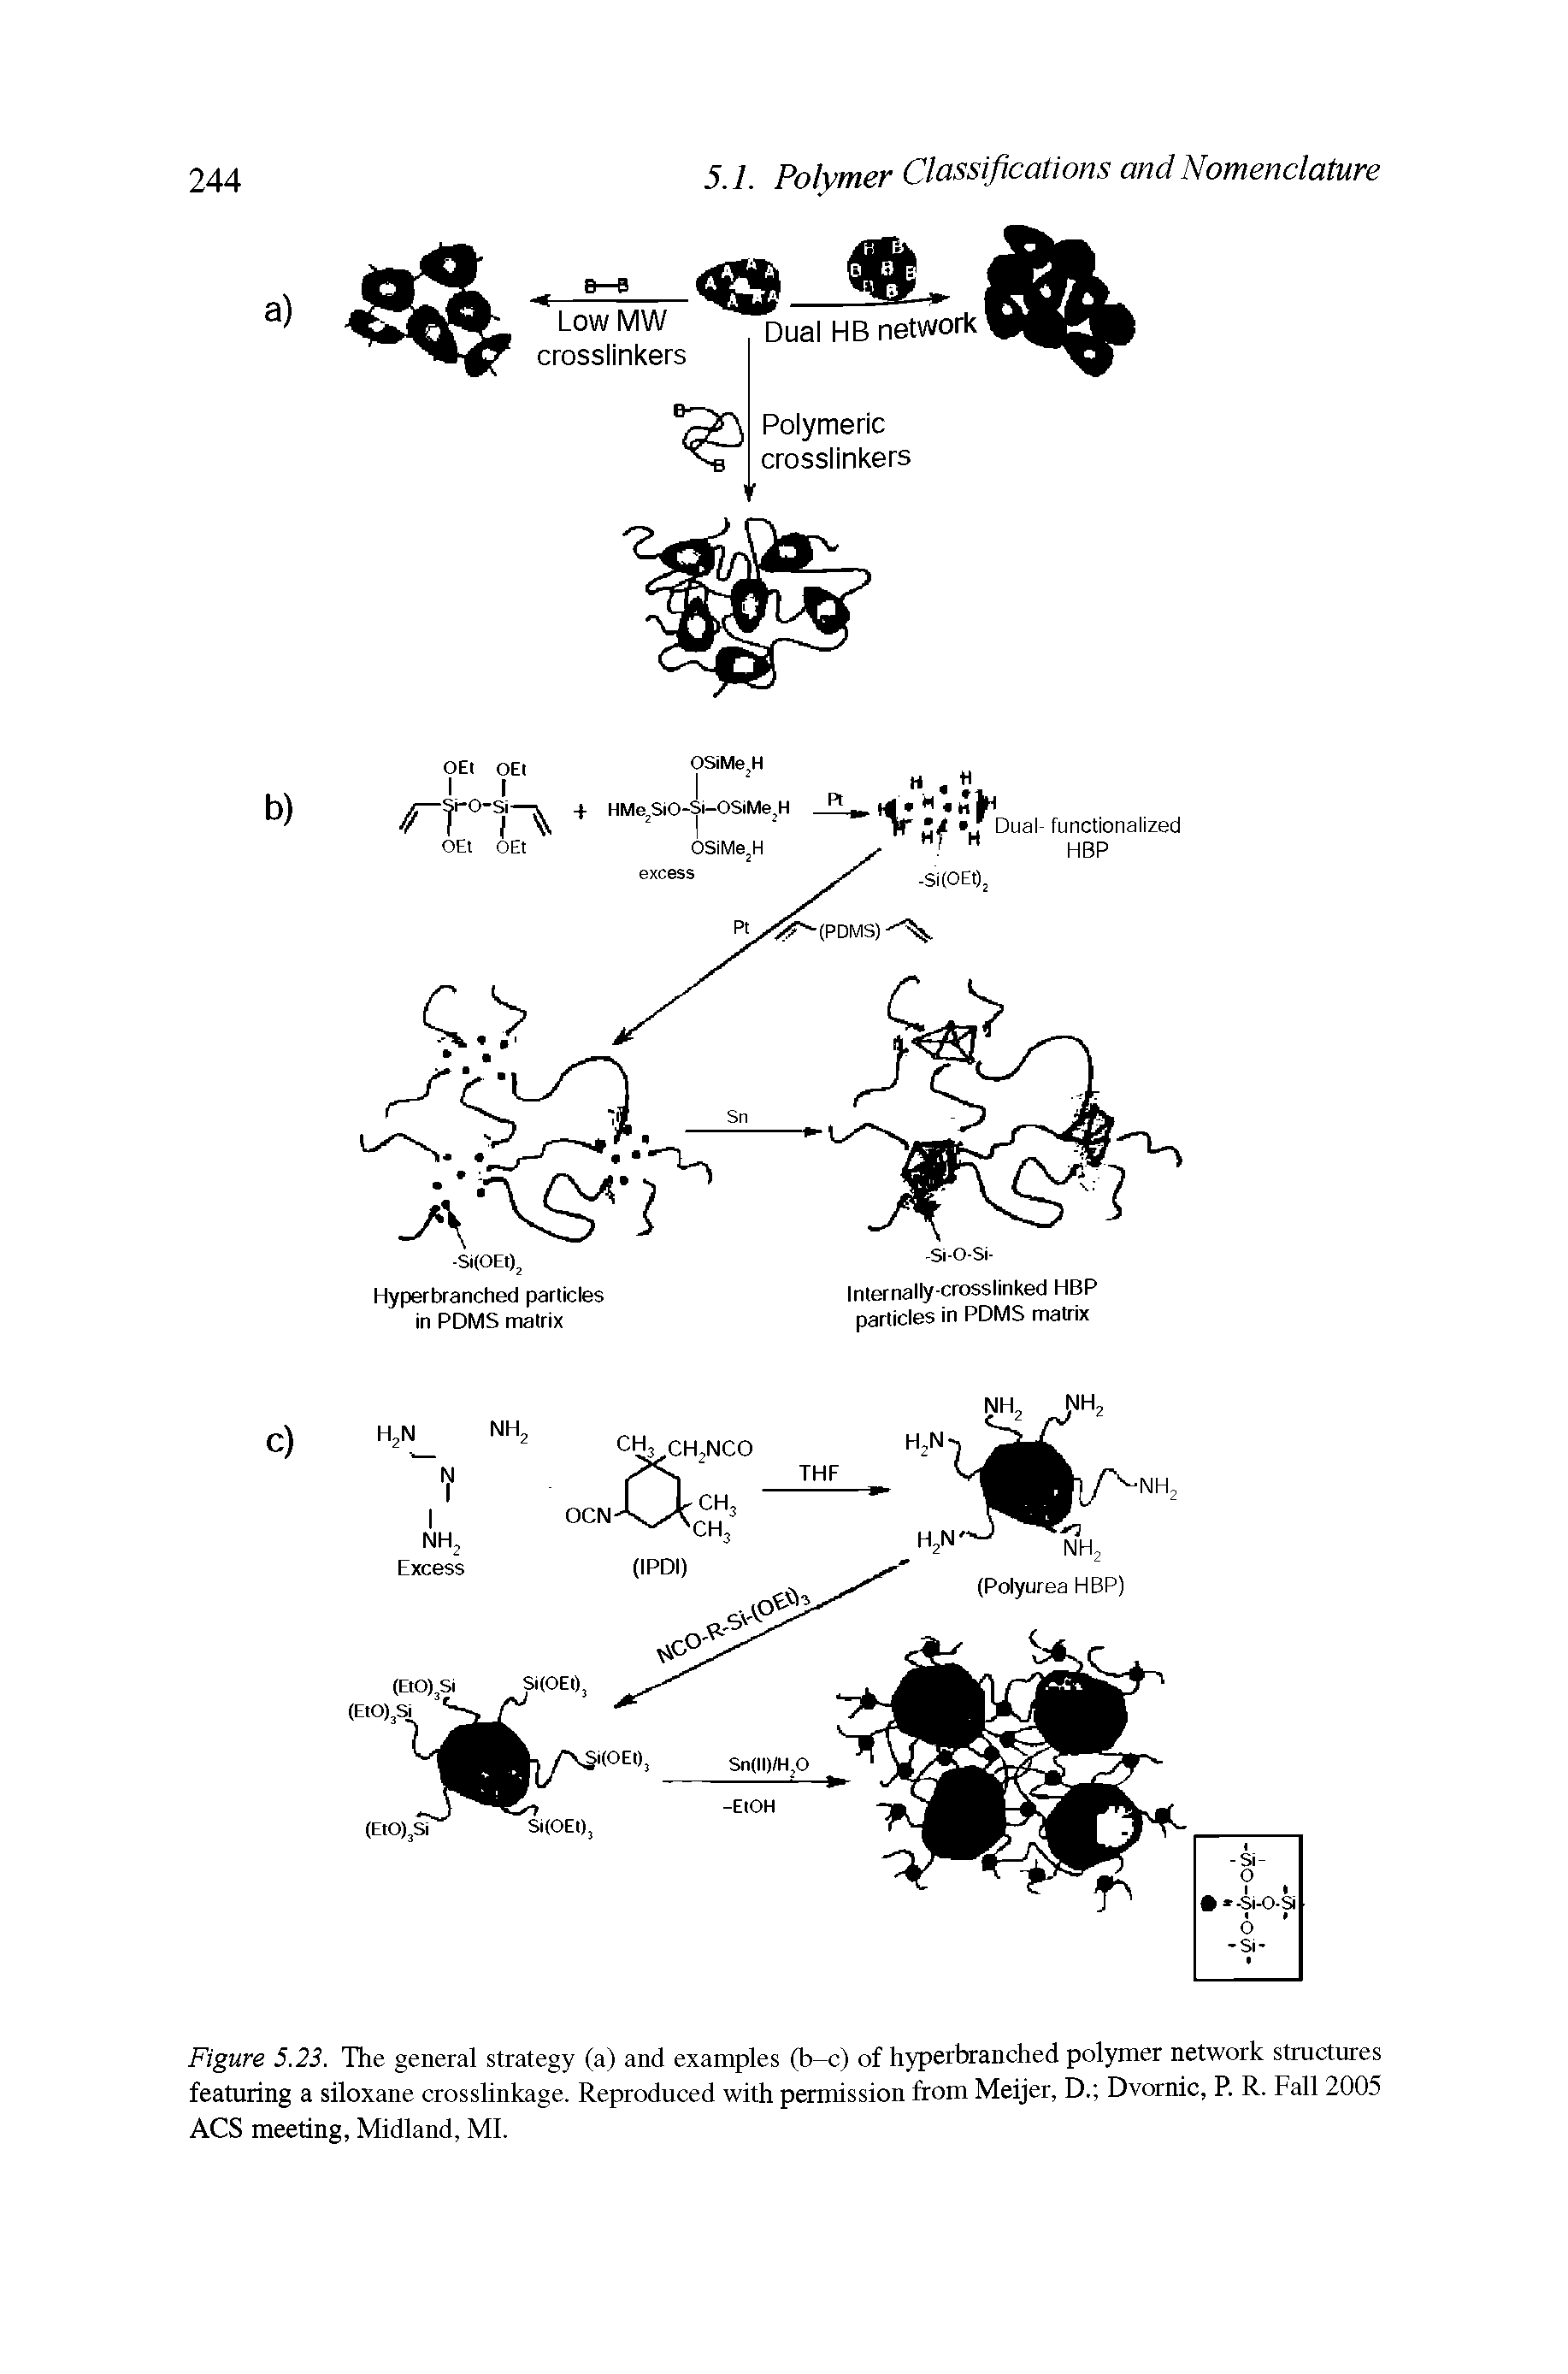 Figure 5.23. The general strategy (a) and examples (It-c) of hyperbranched polymer network structures featuring a siloxane crosslinkage. Reproduced with permission from Meijer, D. Dvornic, R R. Fall 2005 ACS meeting, Midland, Ml.